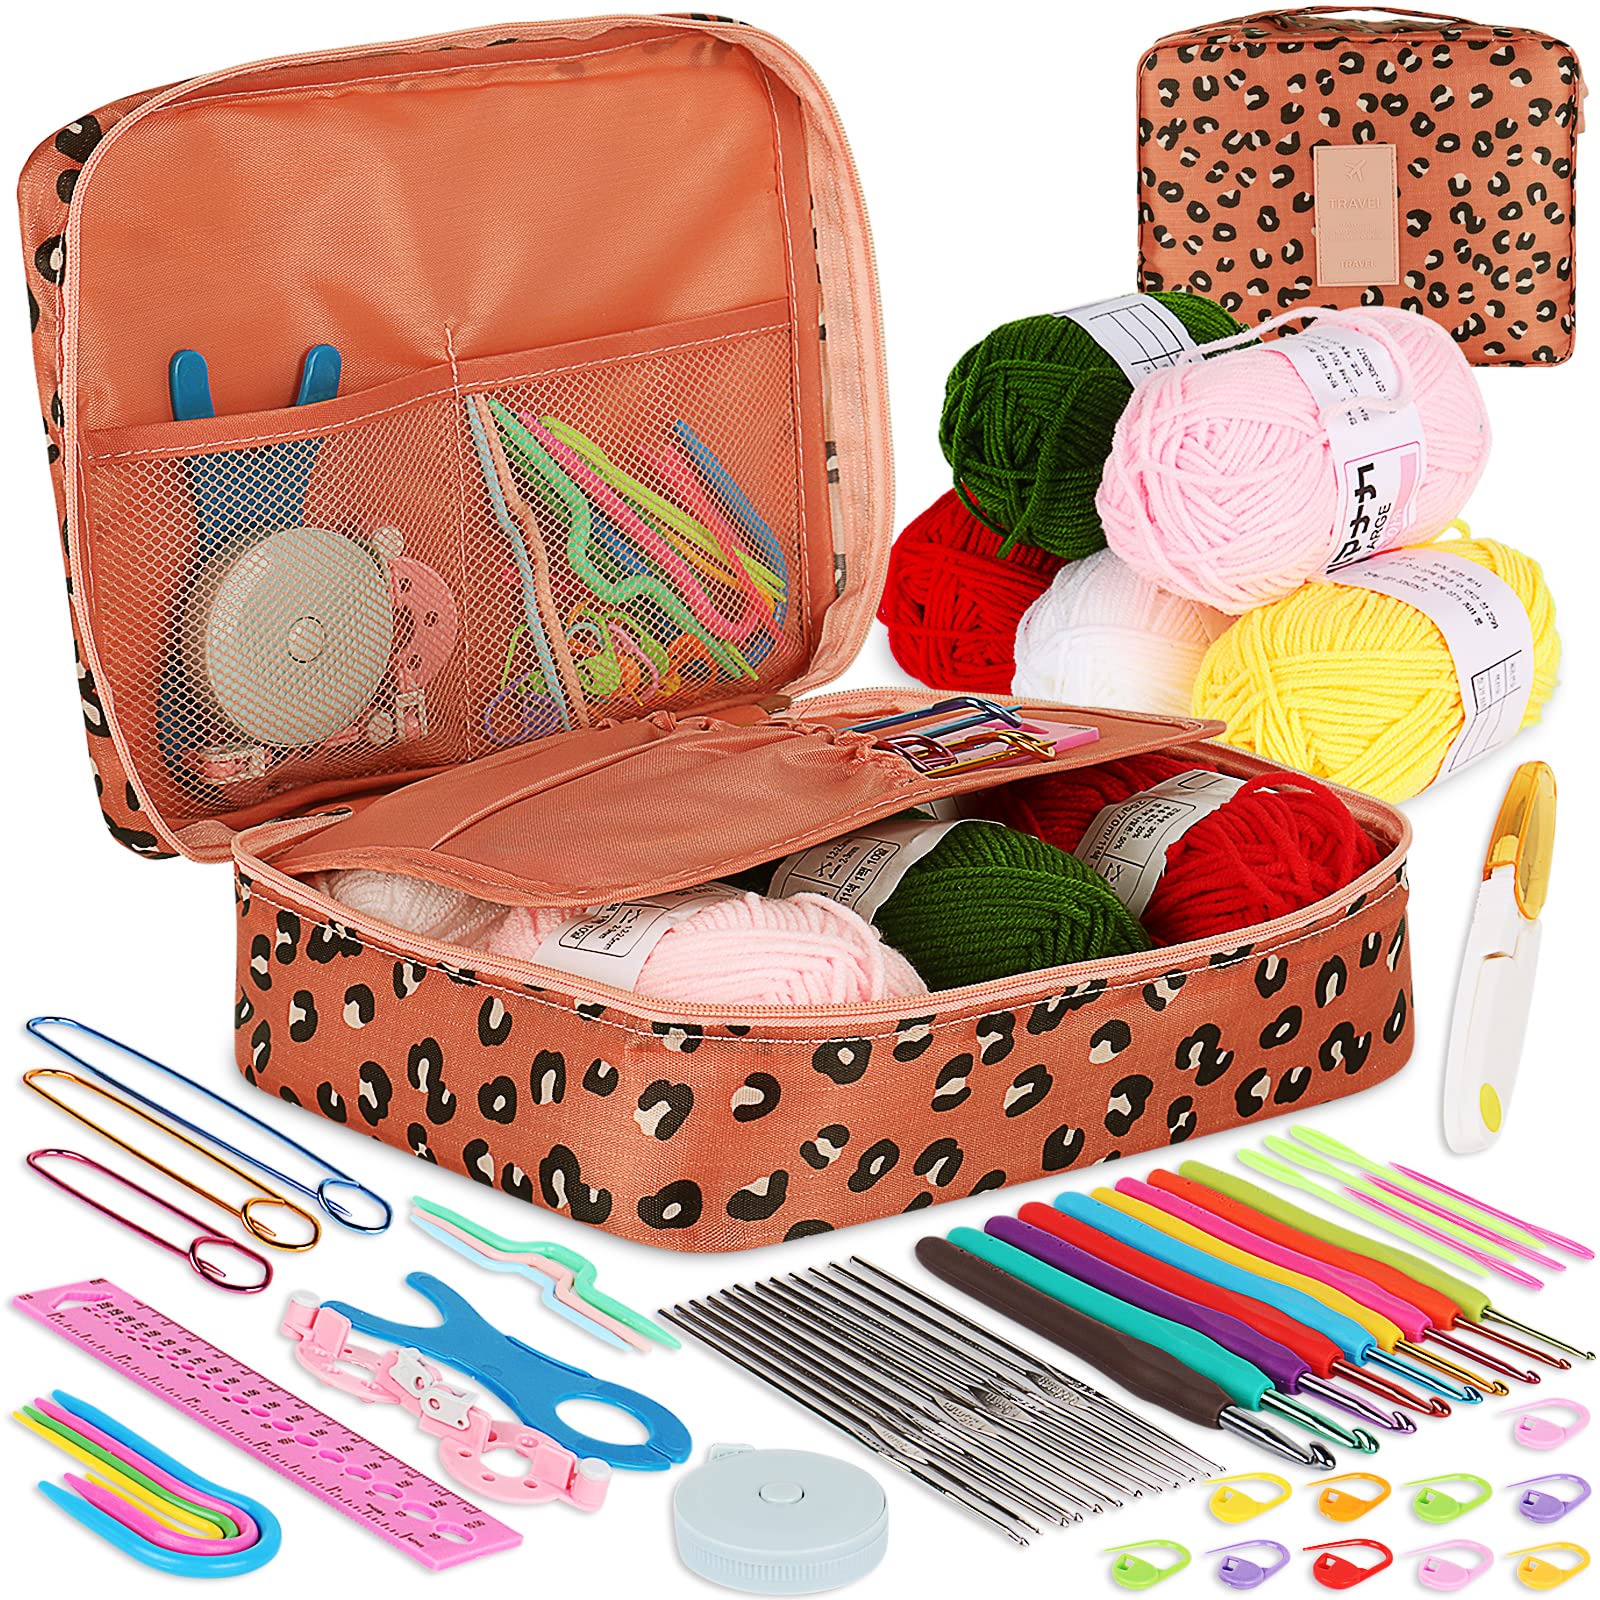 Coopay 58 Piece Crochet Kit with Yarn and Knitting Accessories Set